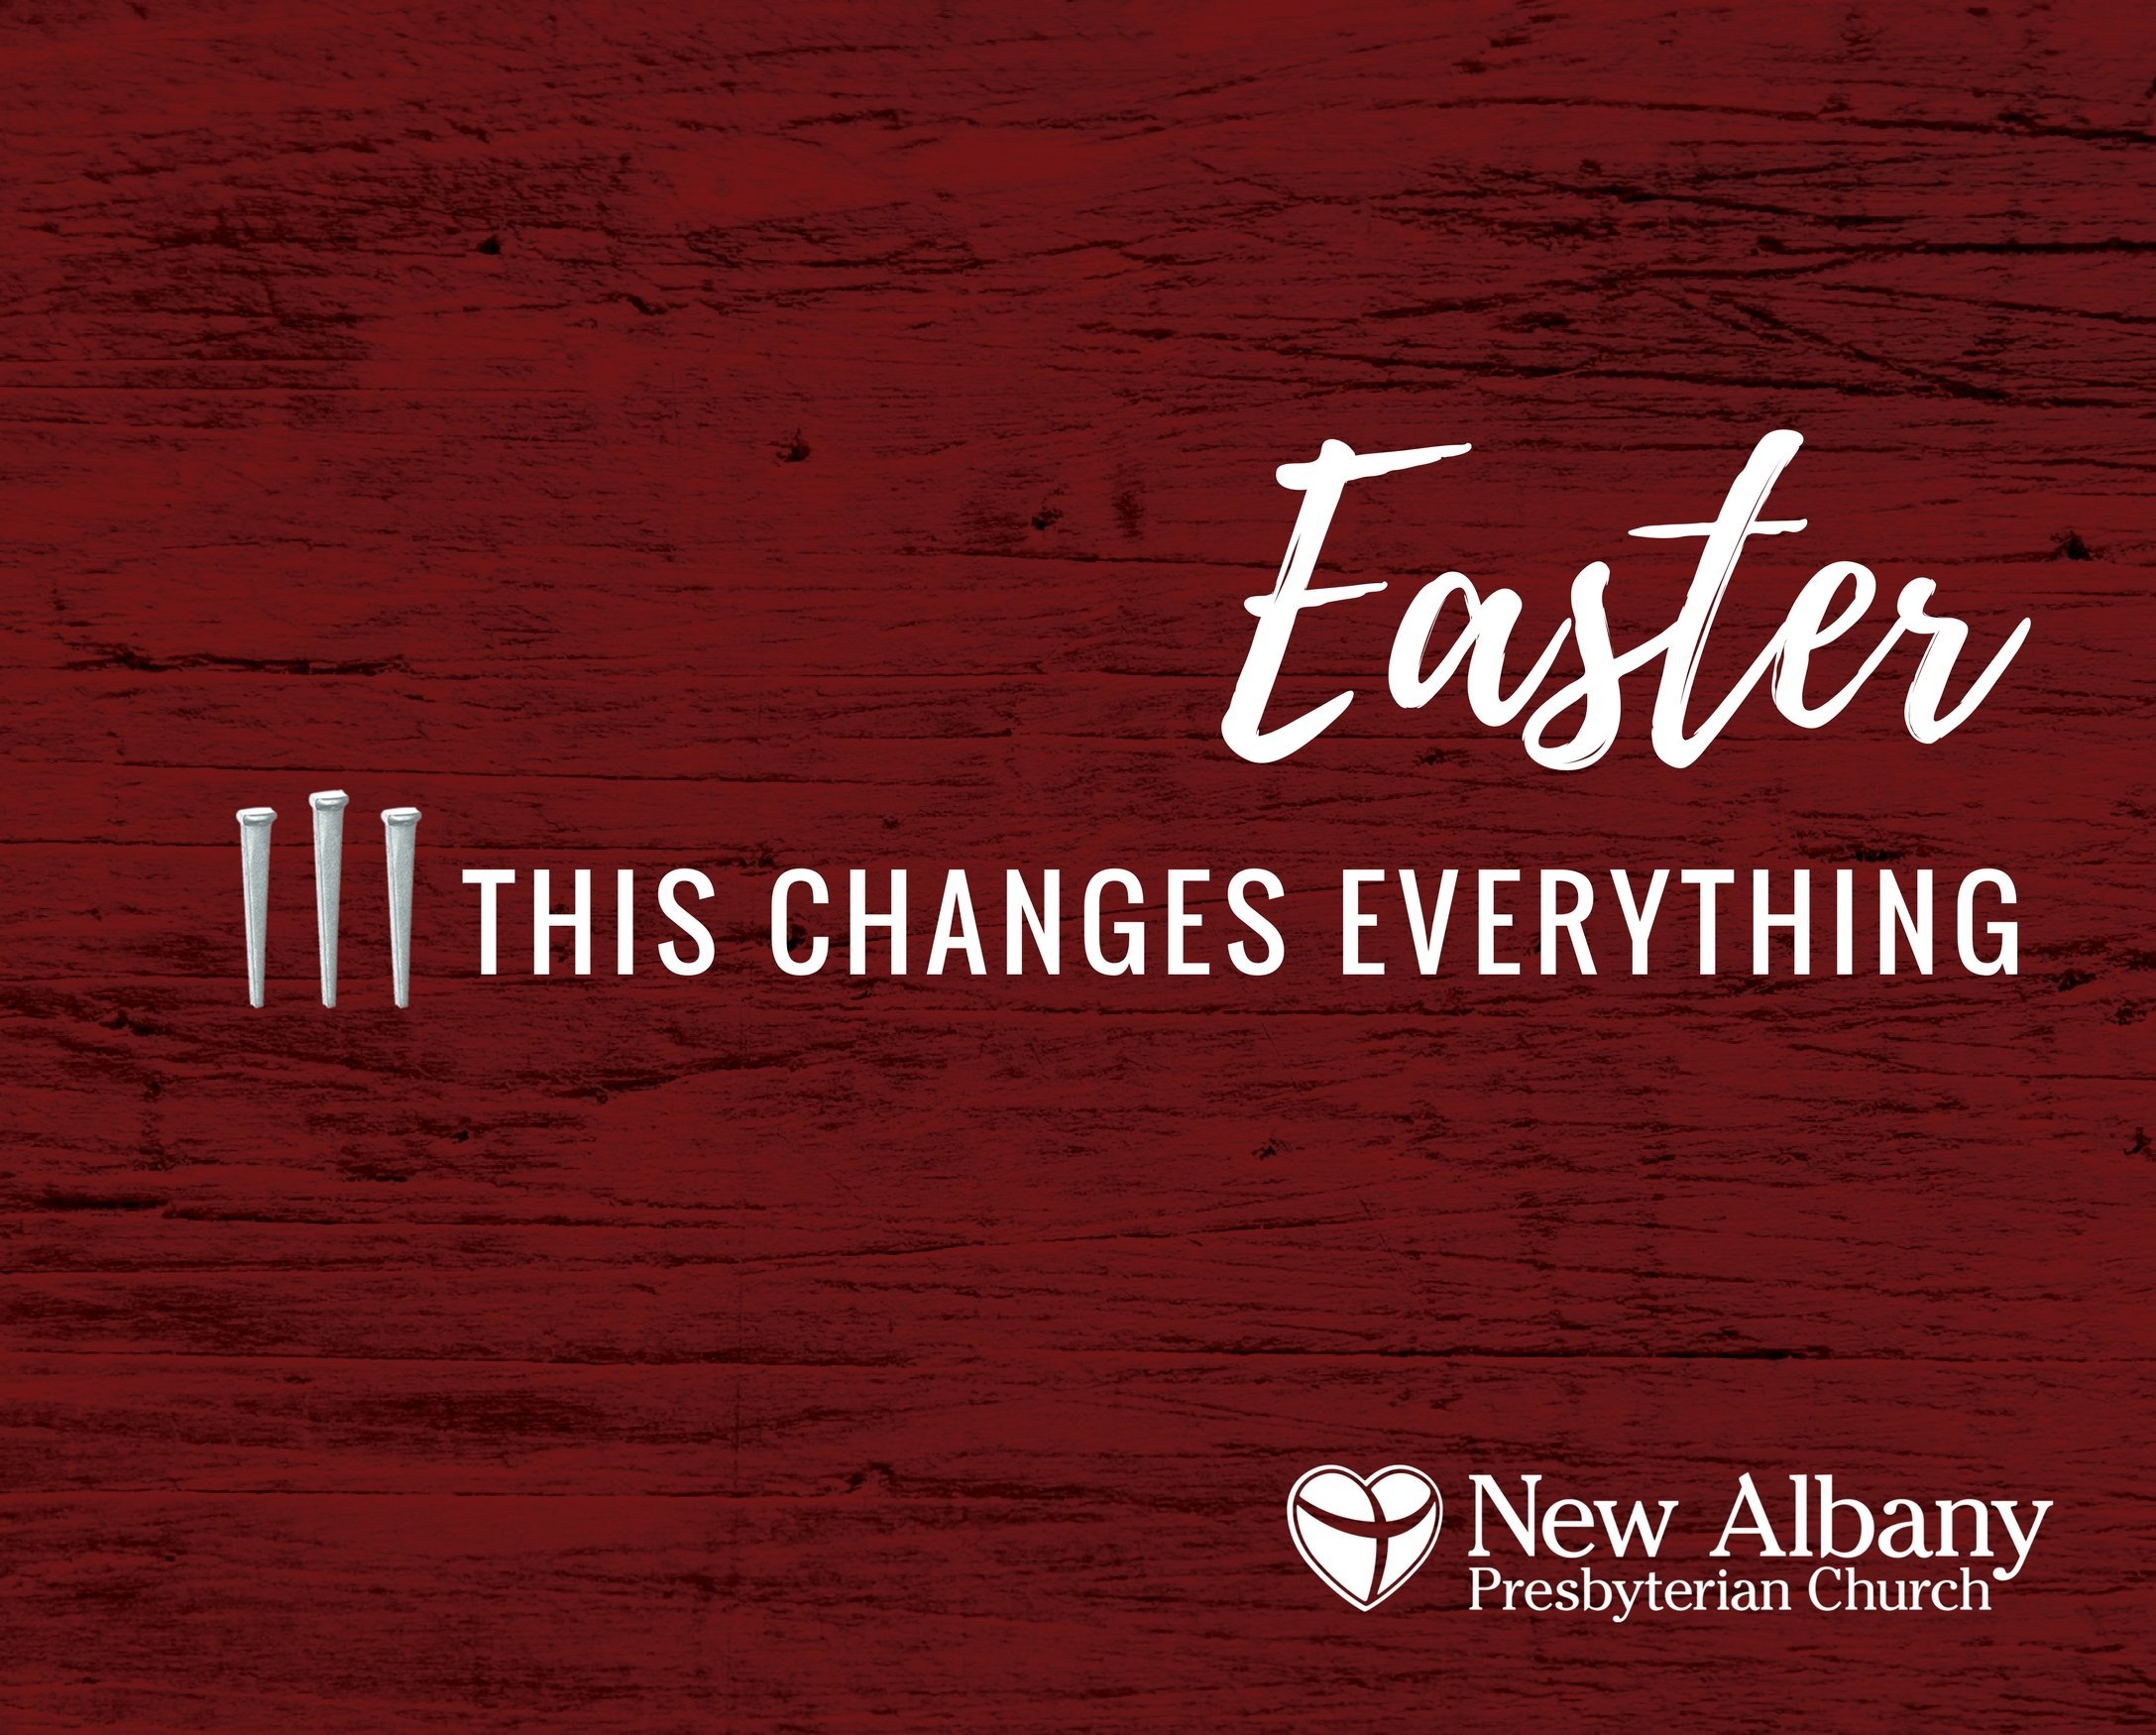 Easter Sunday: This Changes Everything